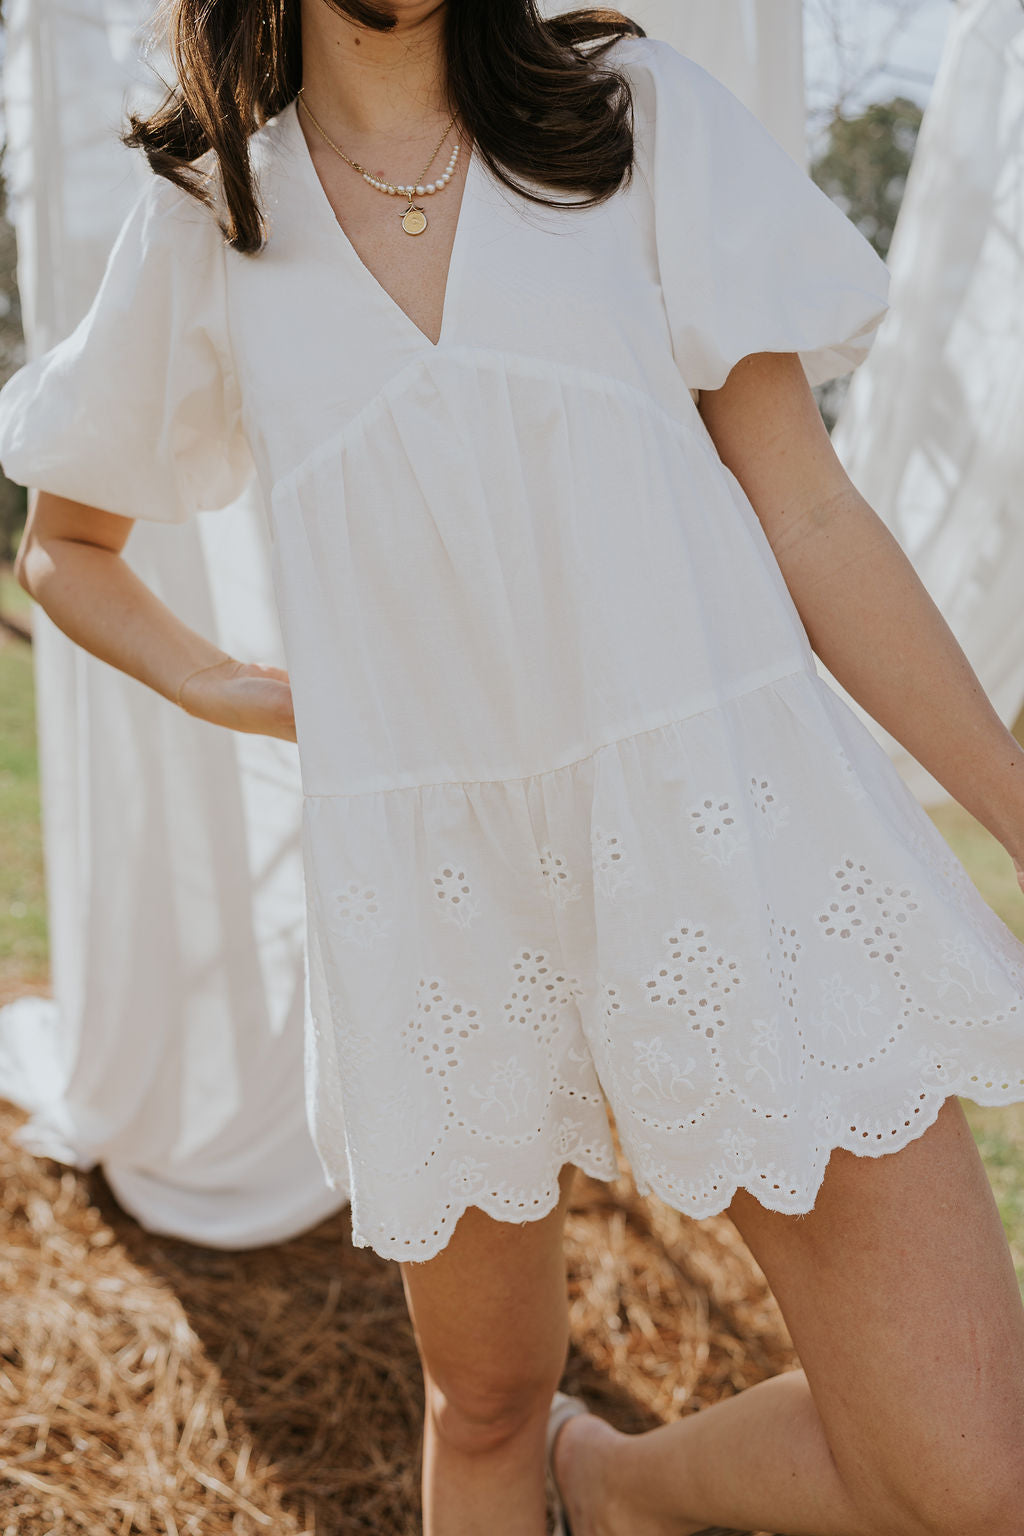 Close front view of female model wearing the Madeline White Eyelet Romper that has white fabric with eyelet details, short puff sleeves, a vneck, and a keyhole back with a tie.